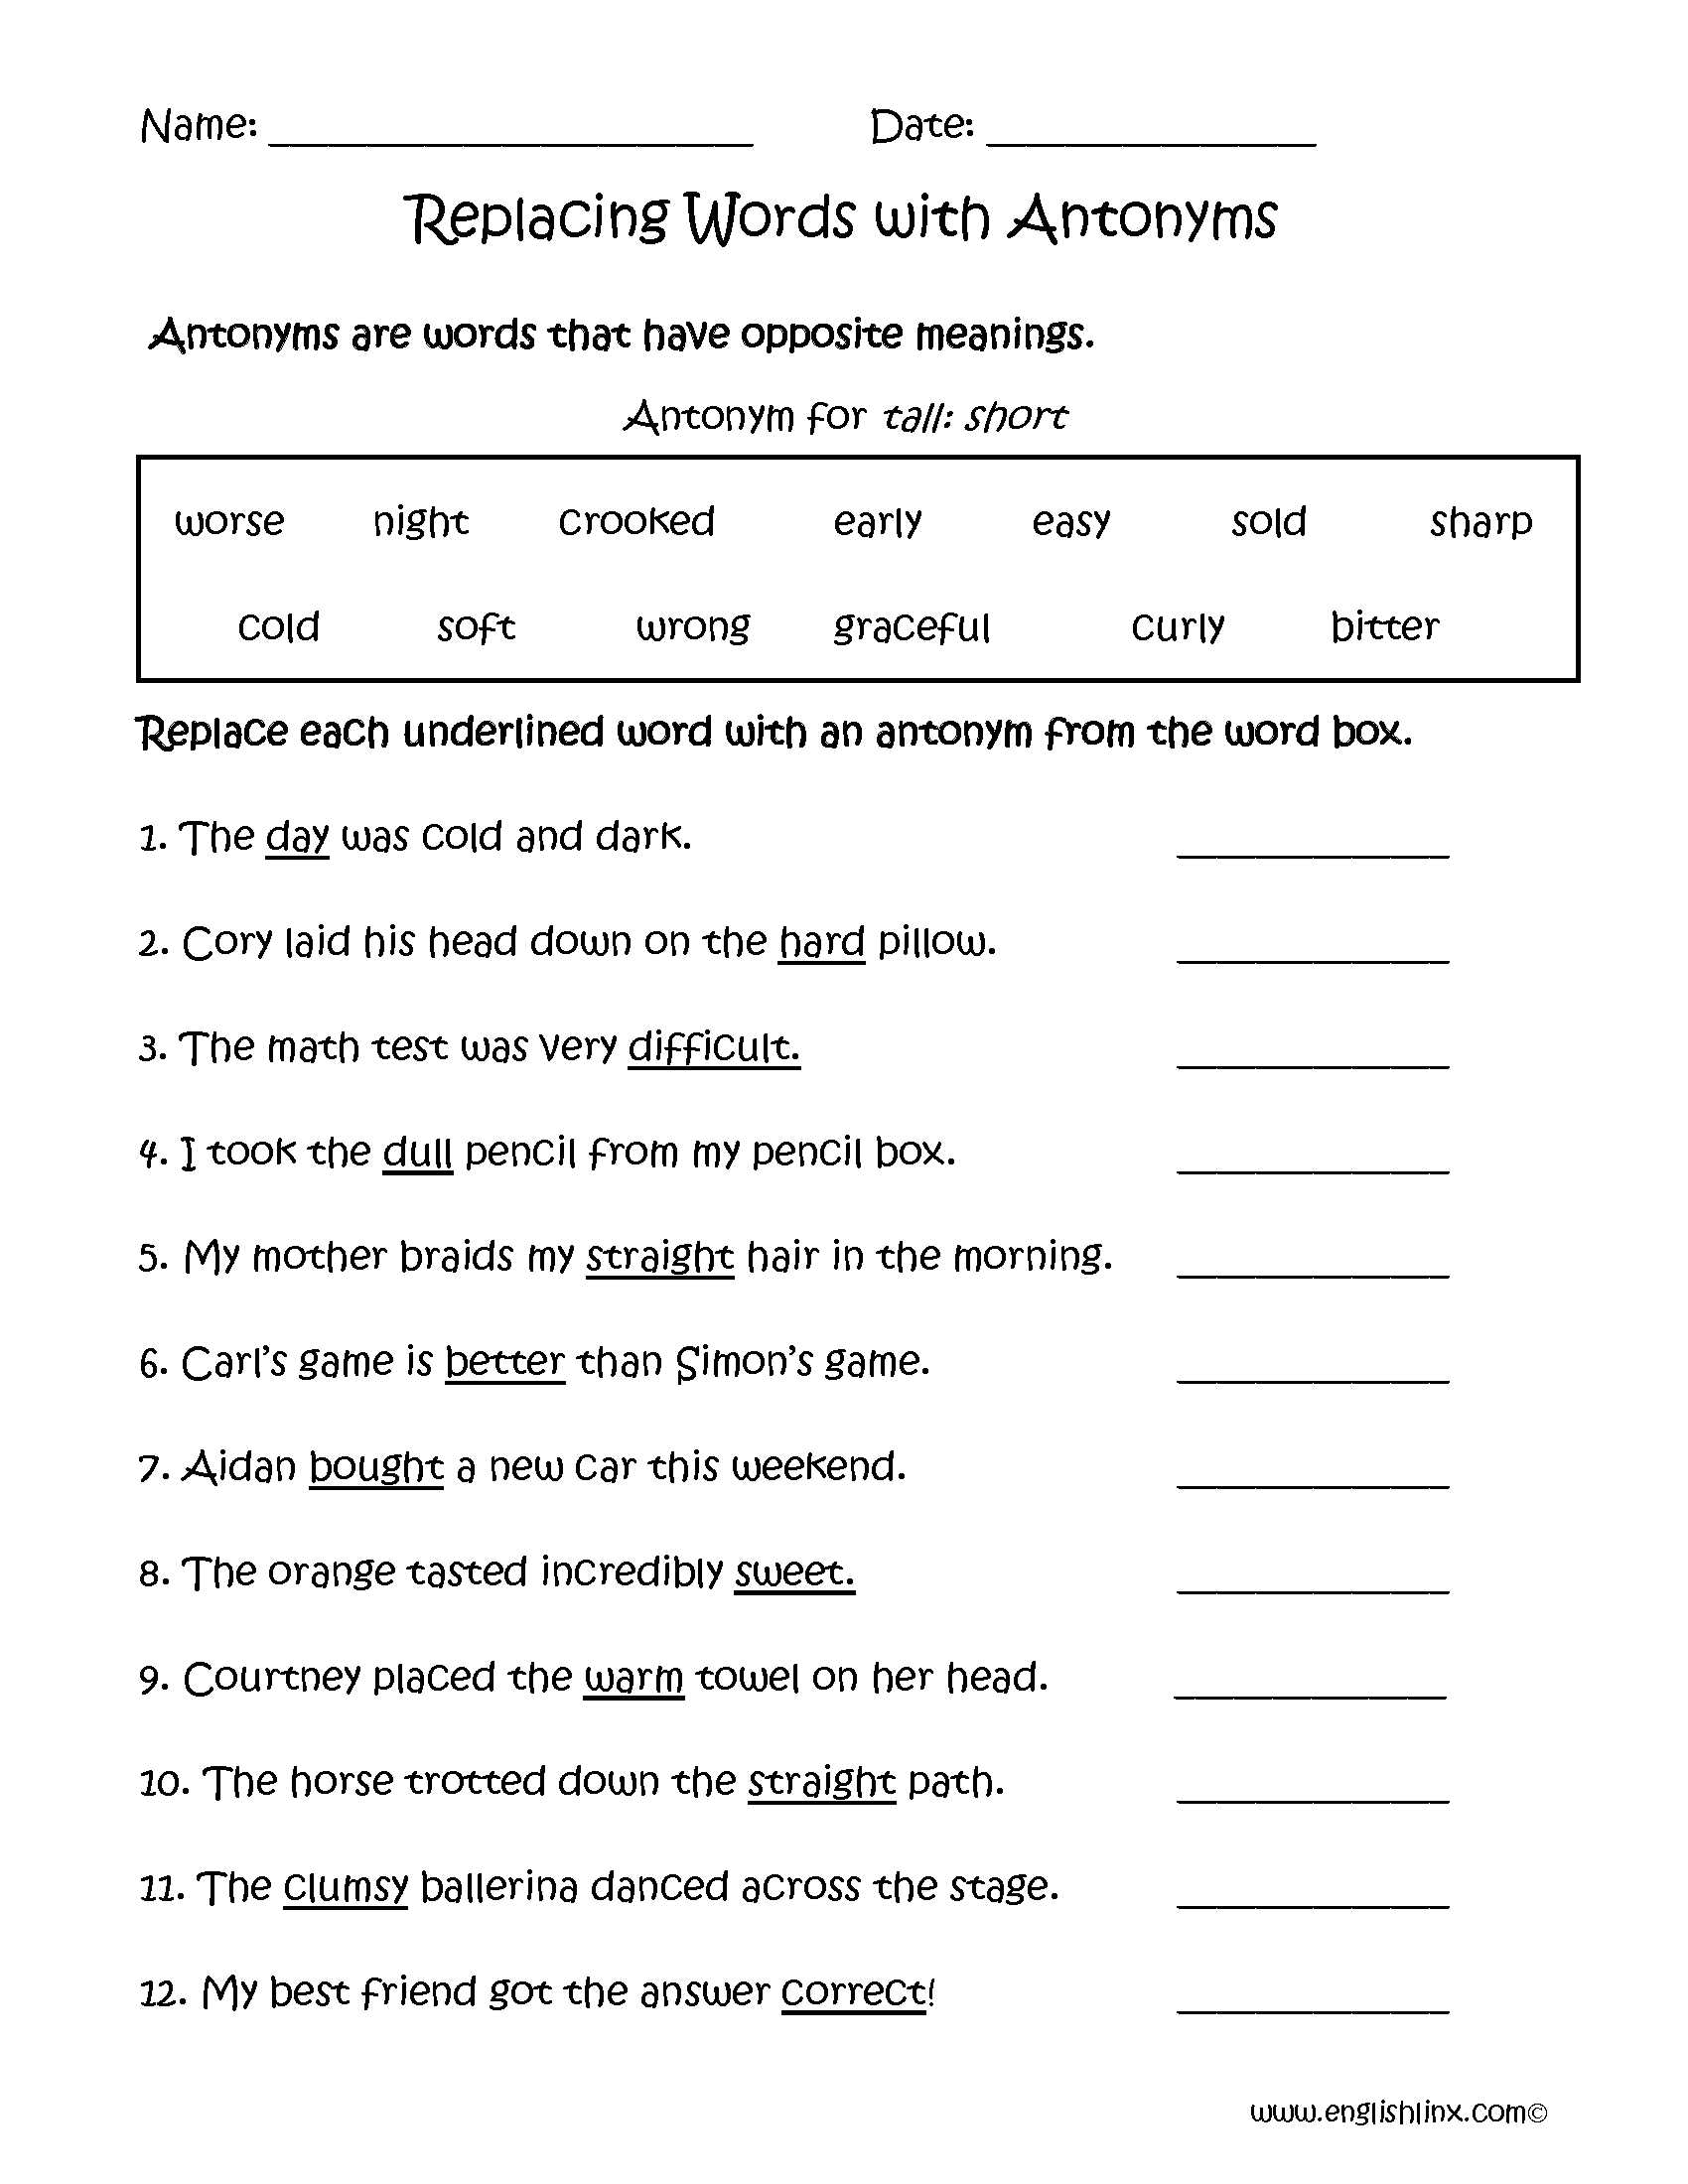 Spanish Worksheets for High School and Replacing Words with Antonyms Worksheets